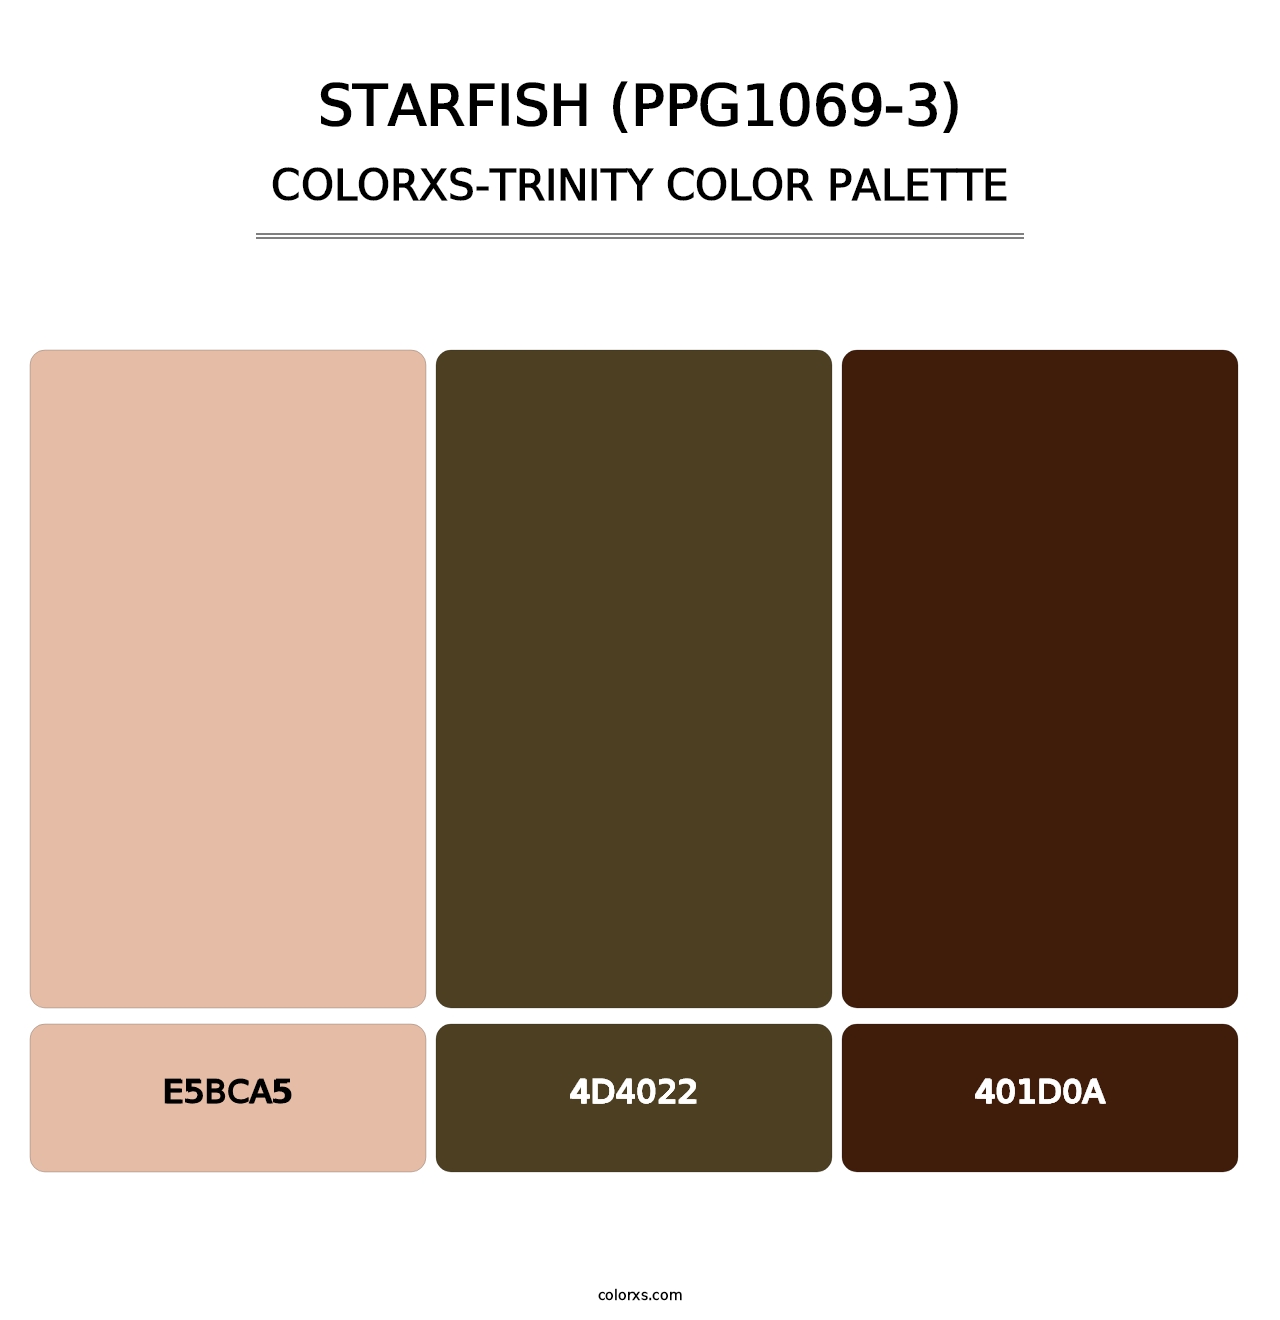 Starfish (PPG1069-3) - Colorxs Trinity Palette